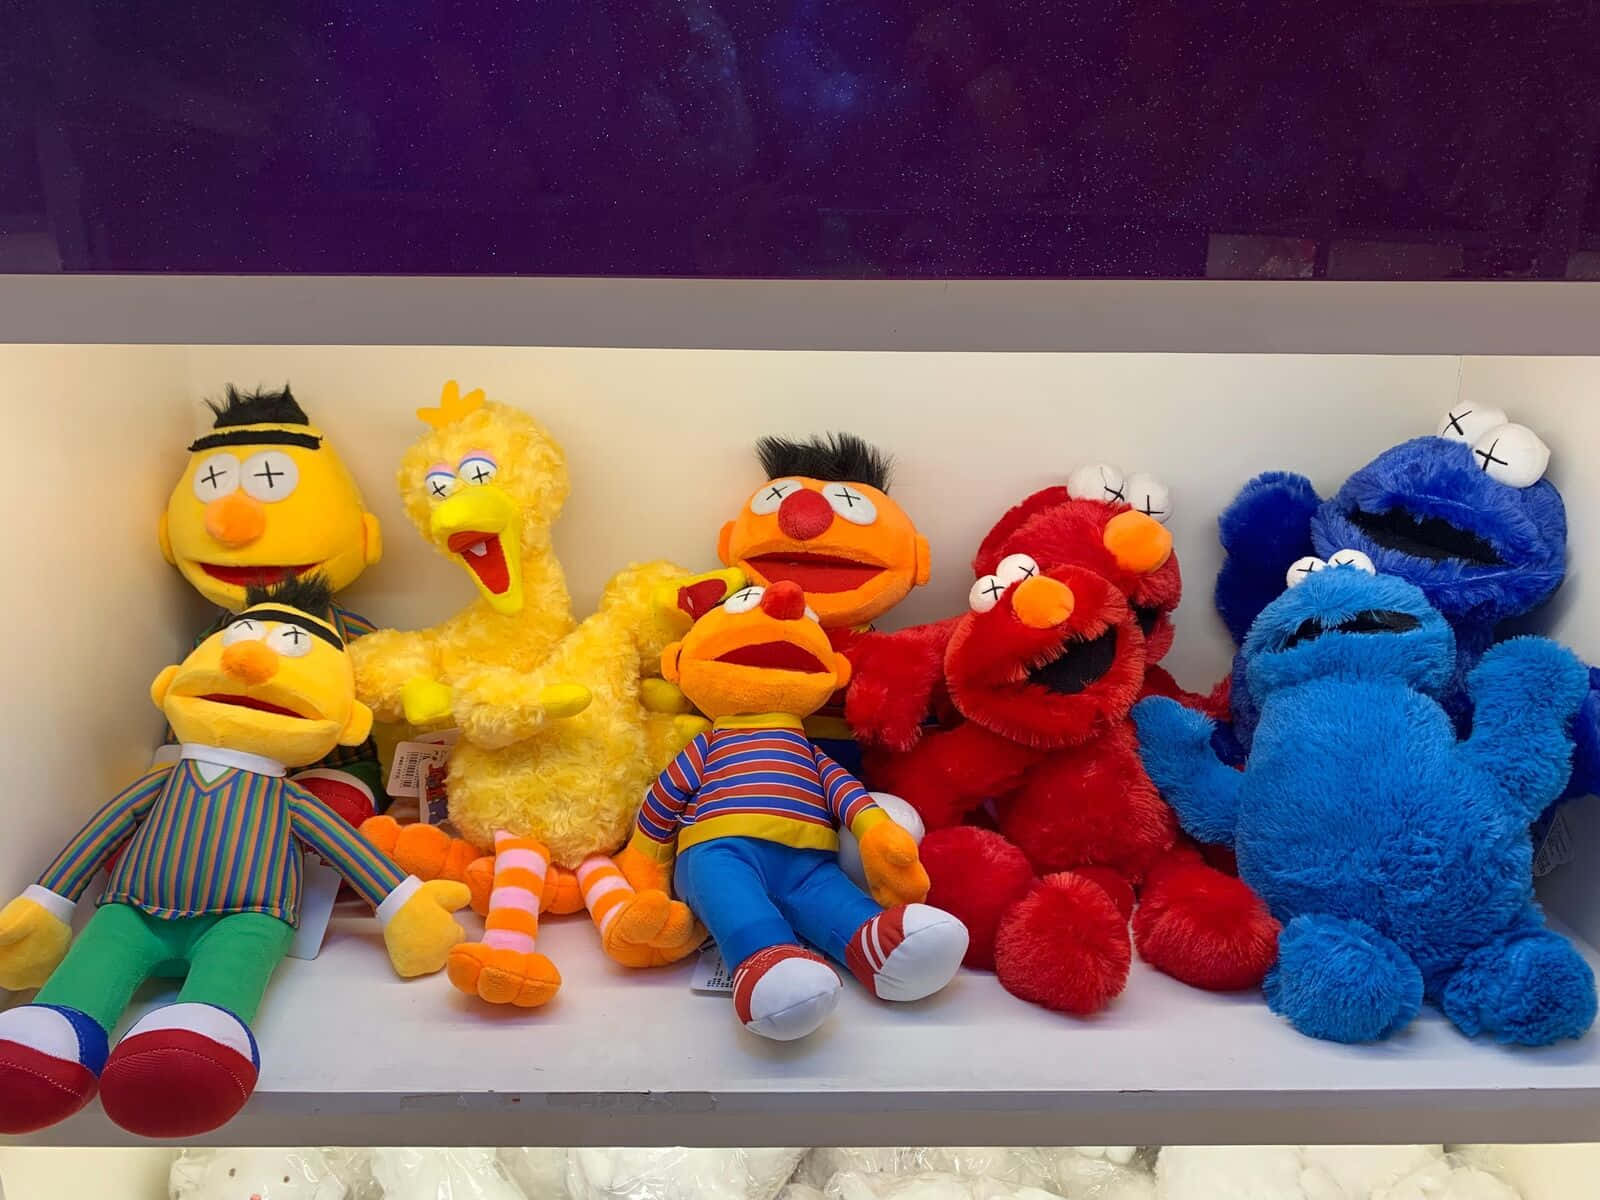 KAWS Collaborates with Sesame Street for Unique Art Piece Wallpaper